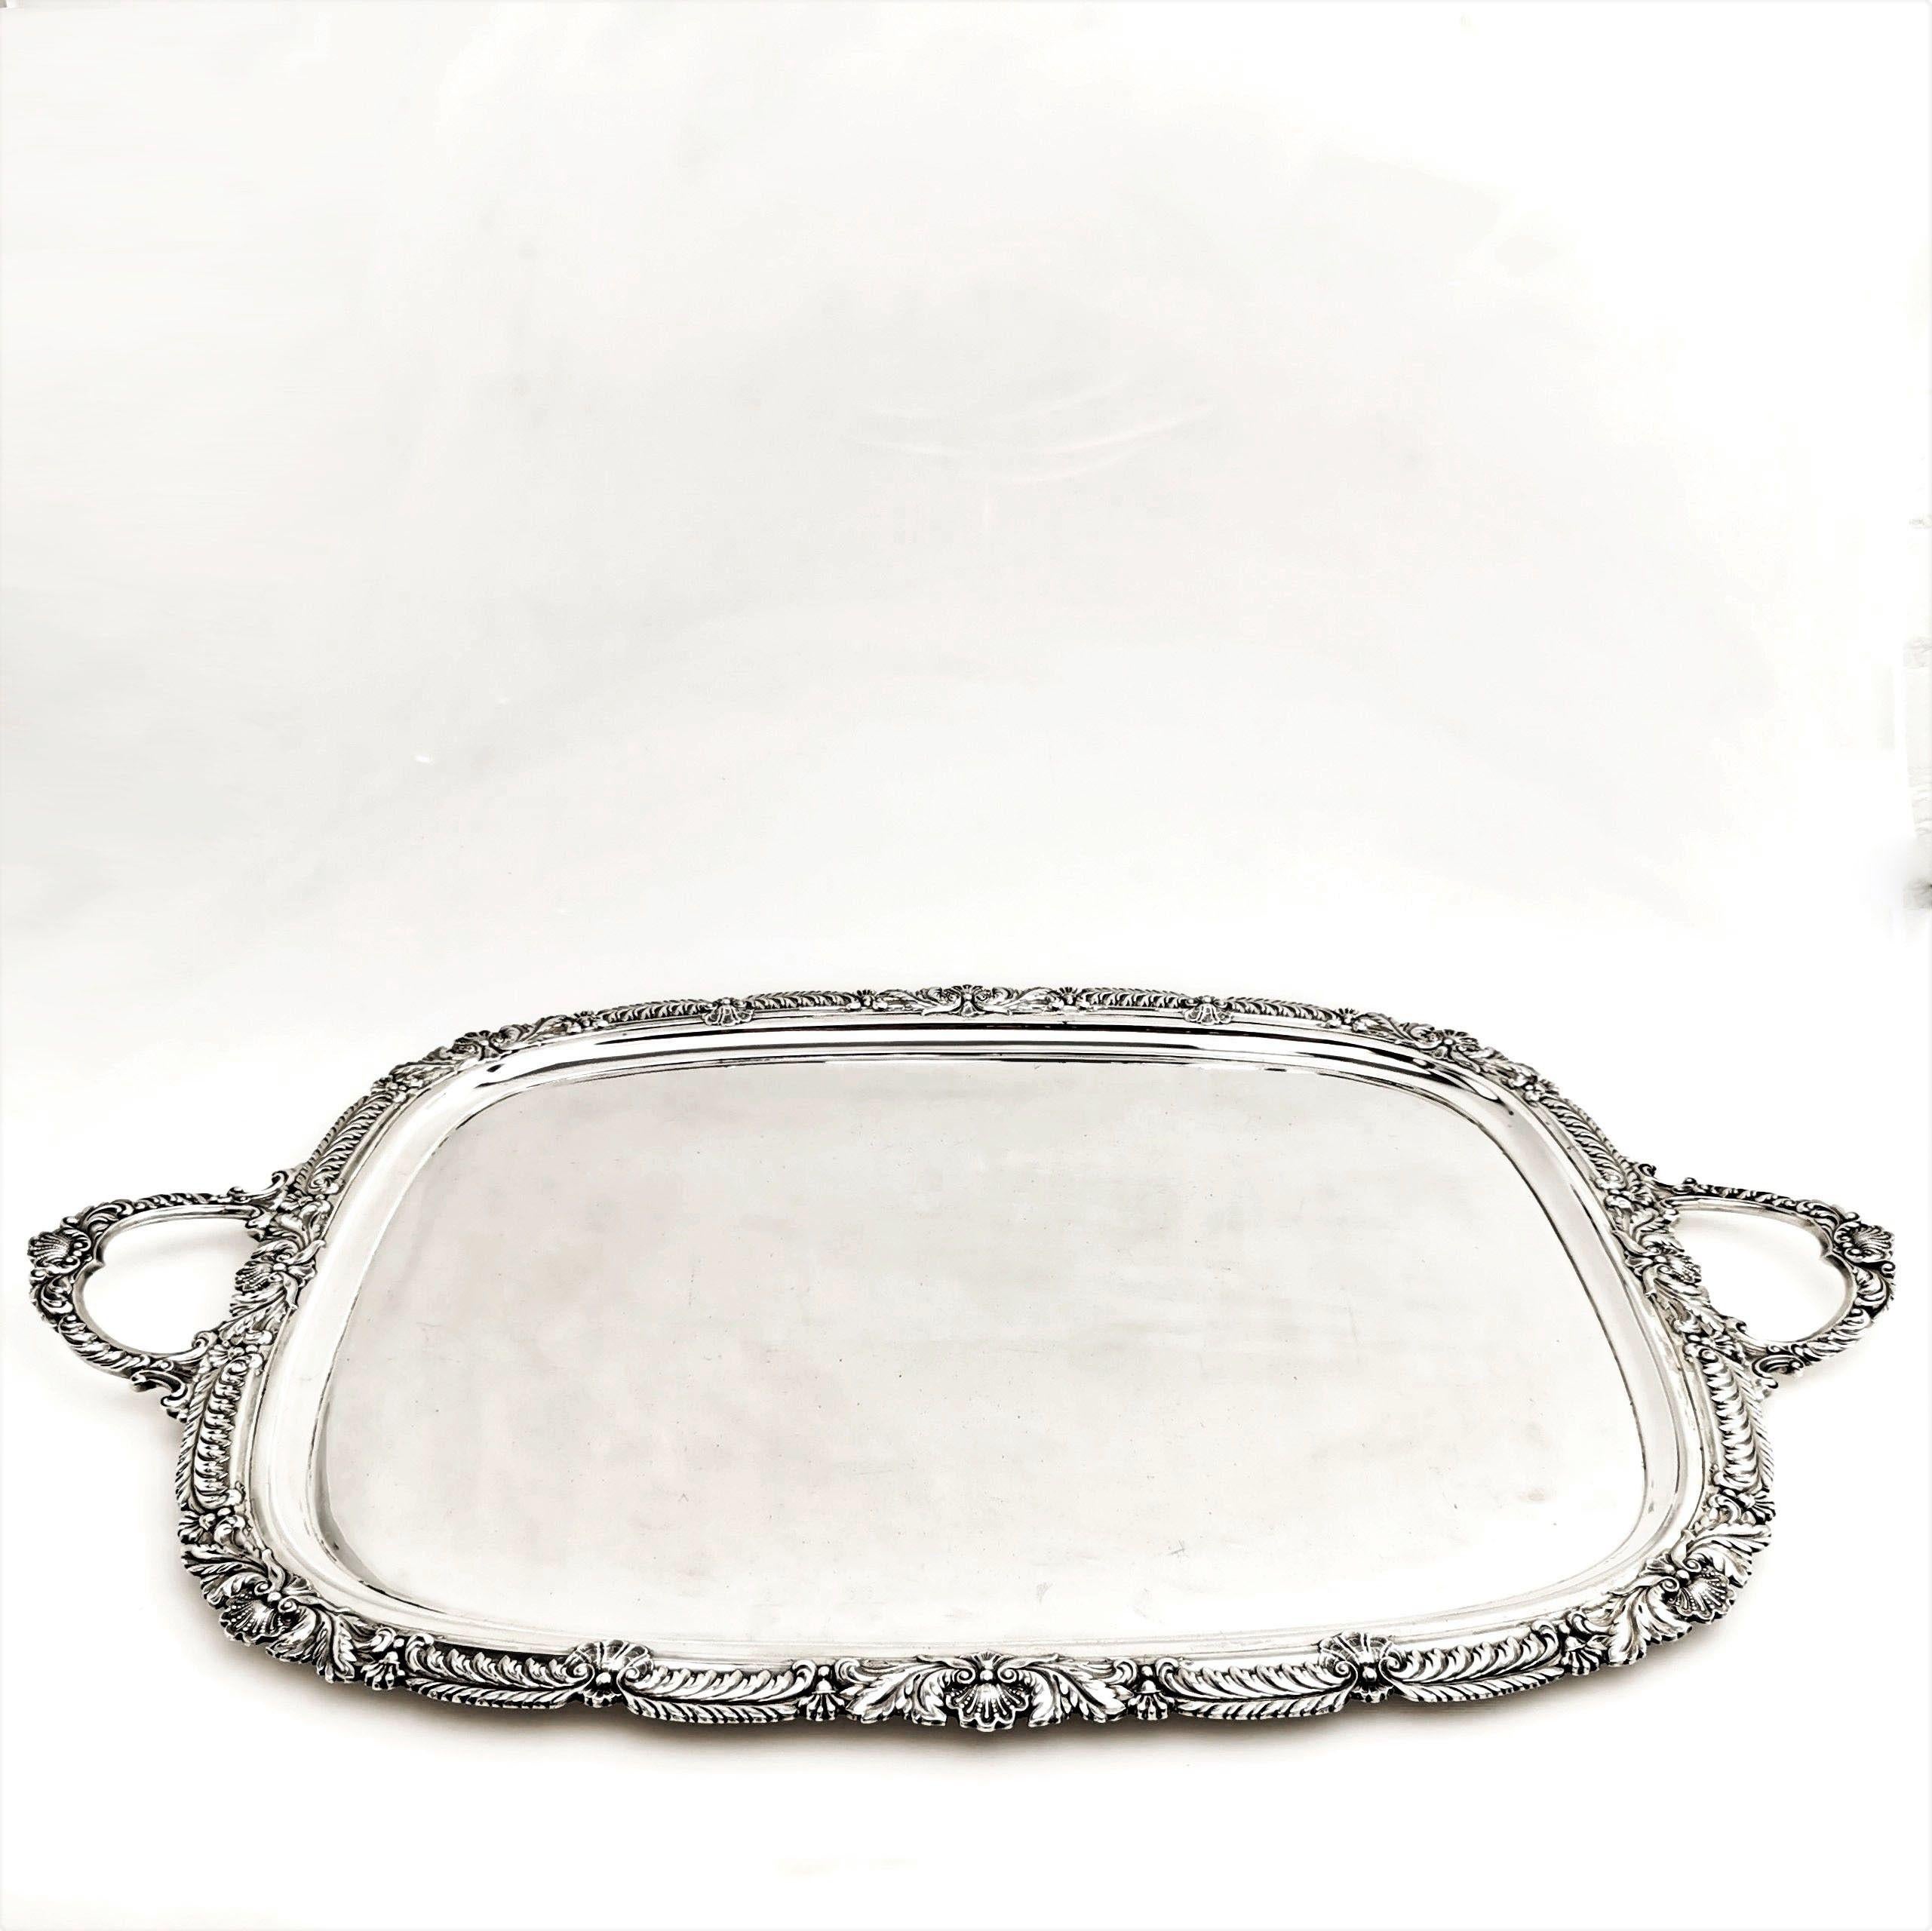 An impressive solid Silver Serving Tray with an elegant shell and gadroon border. This large silver Tray has two shell embellished handles.
 
 Made in Sheffield in 1908 by Marples & Co.
 
Approx. Weight - 4882g / 156.9oz
Approx. Length include